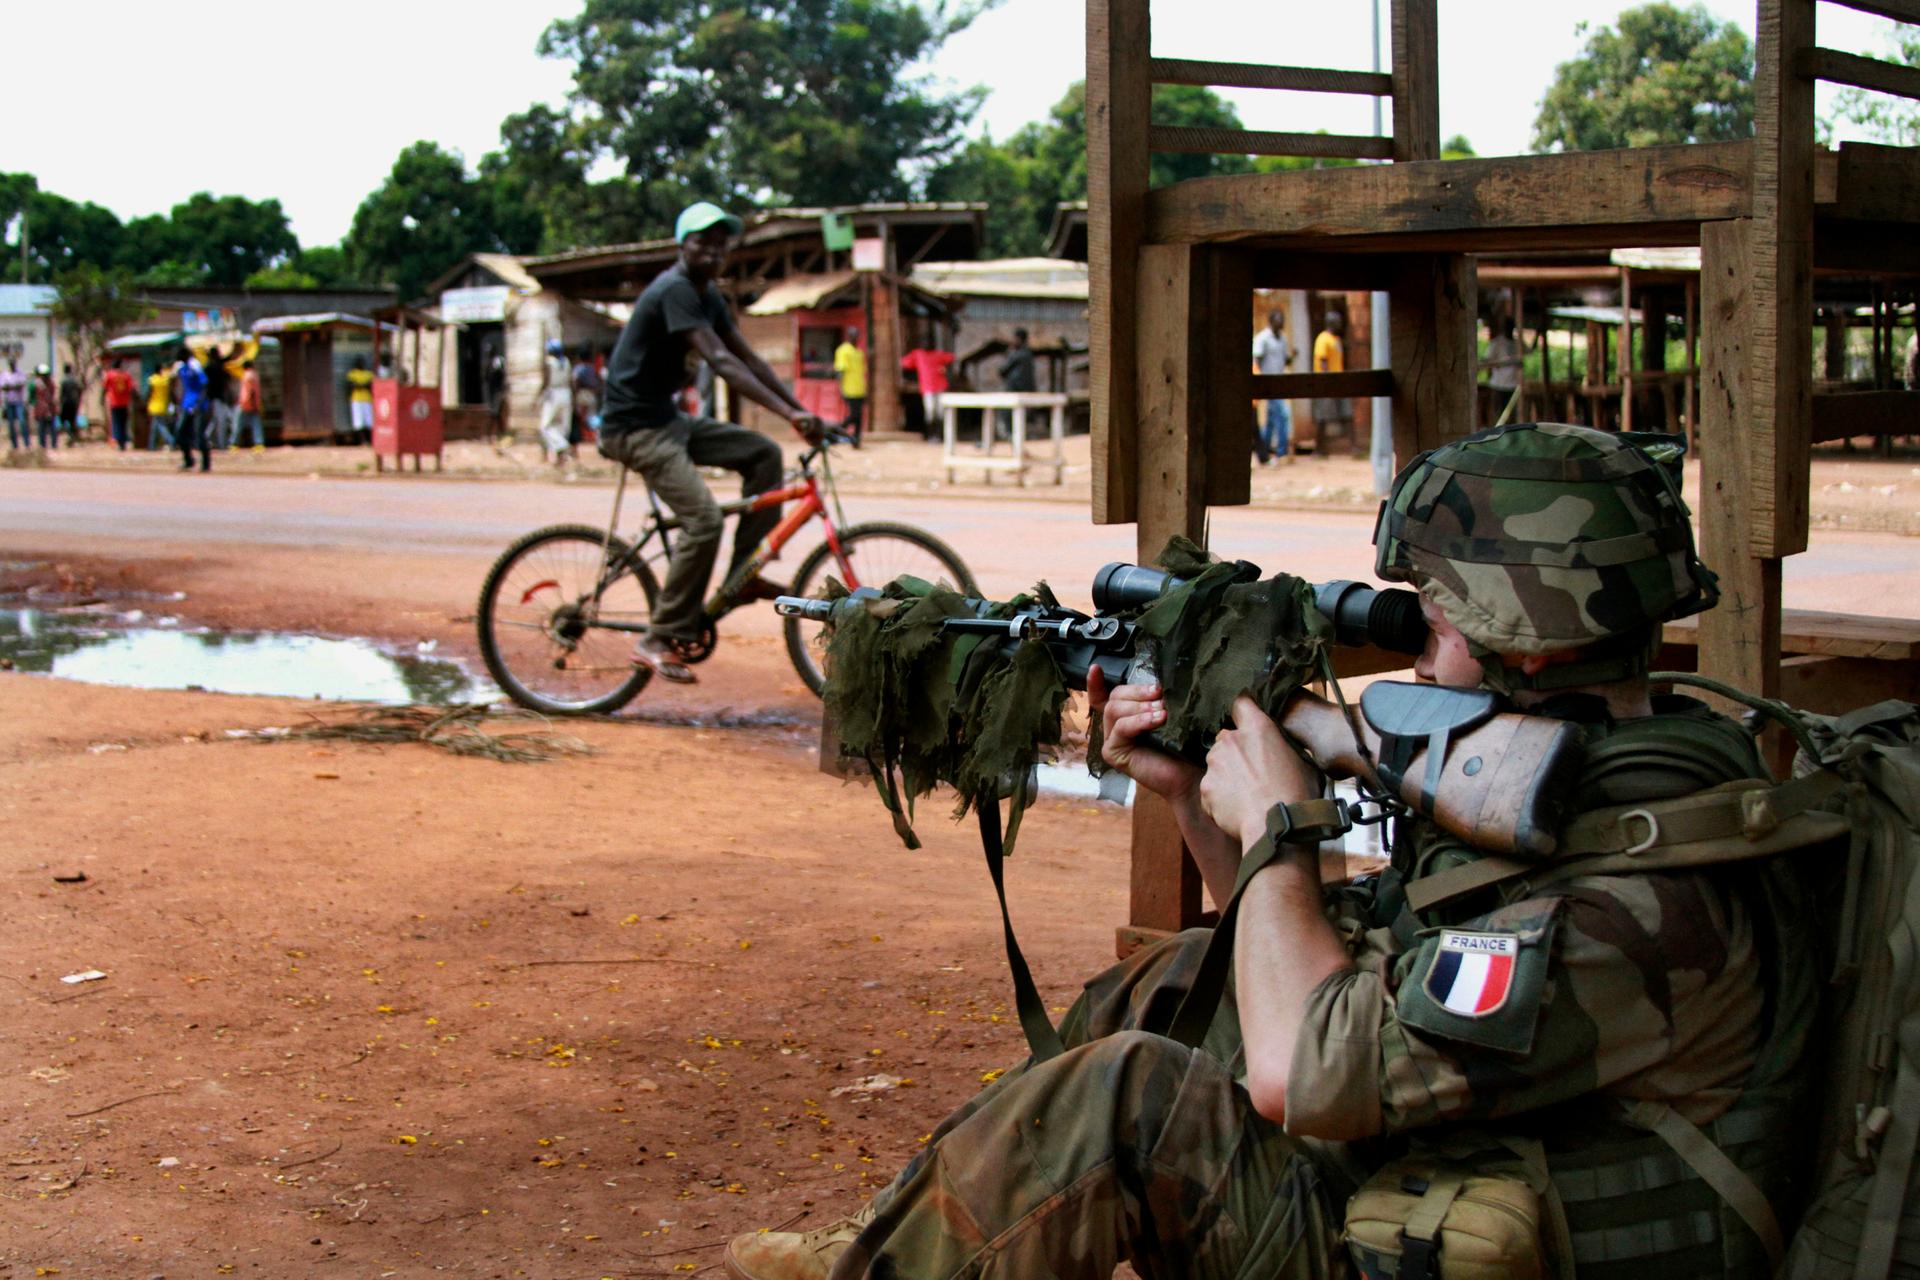  A French military sniper readies his rifle in Bangui.